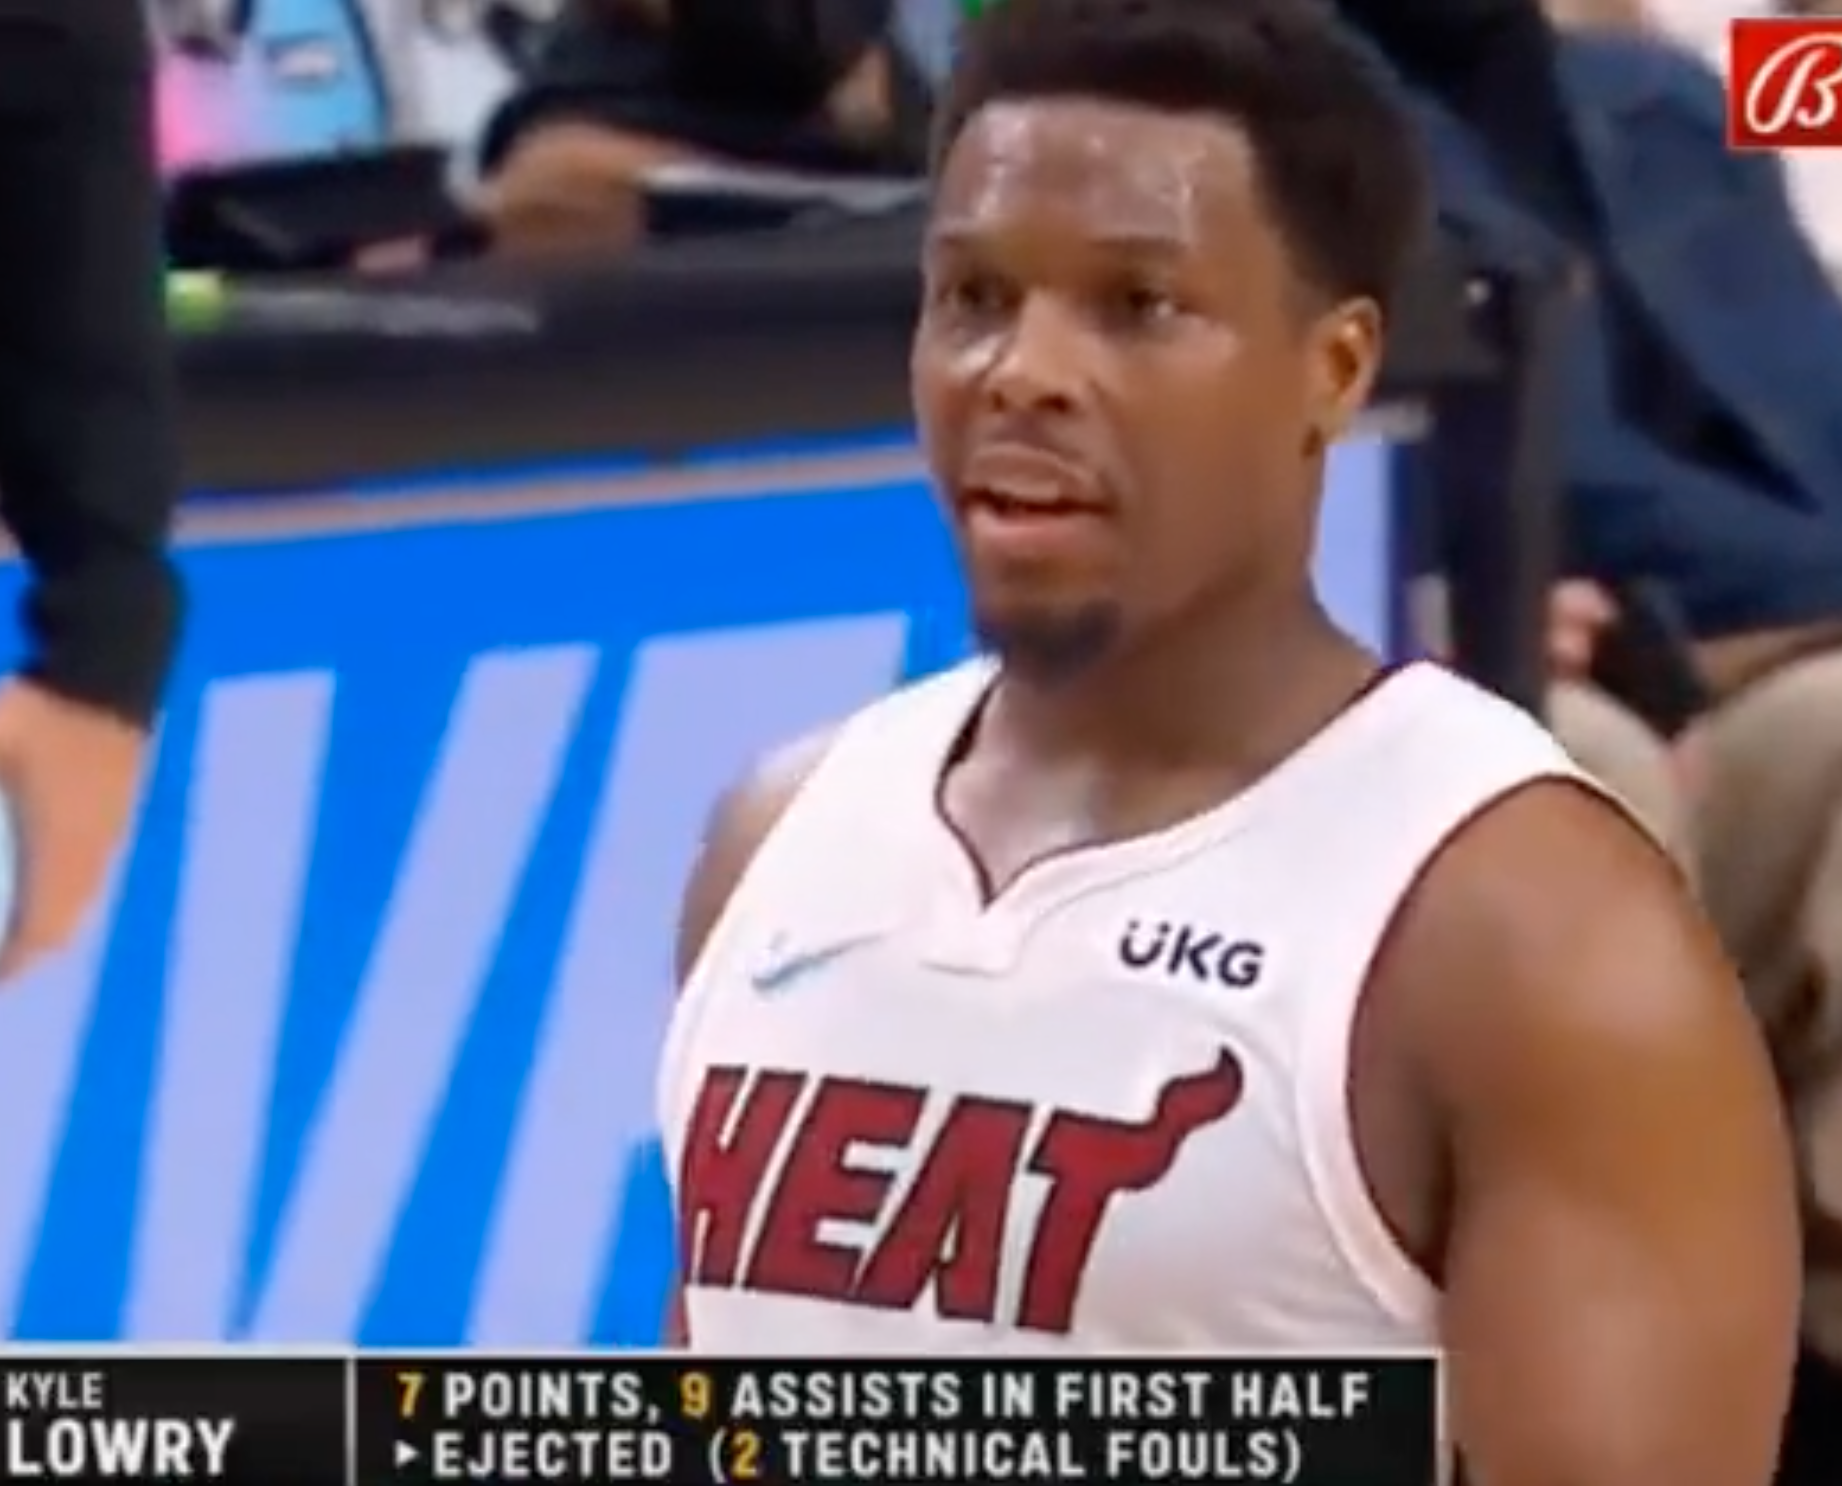 A slimmer Kyle Lowry showing glimpses of improvement this preseason